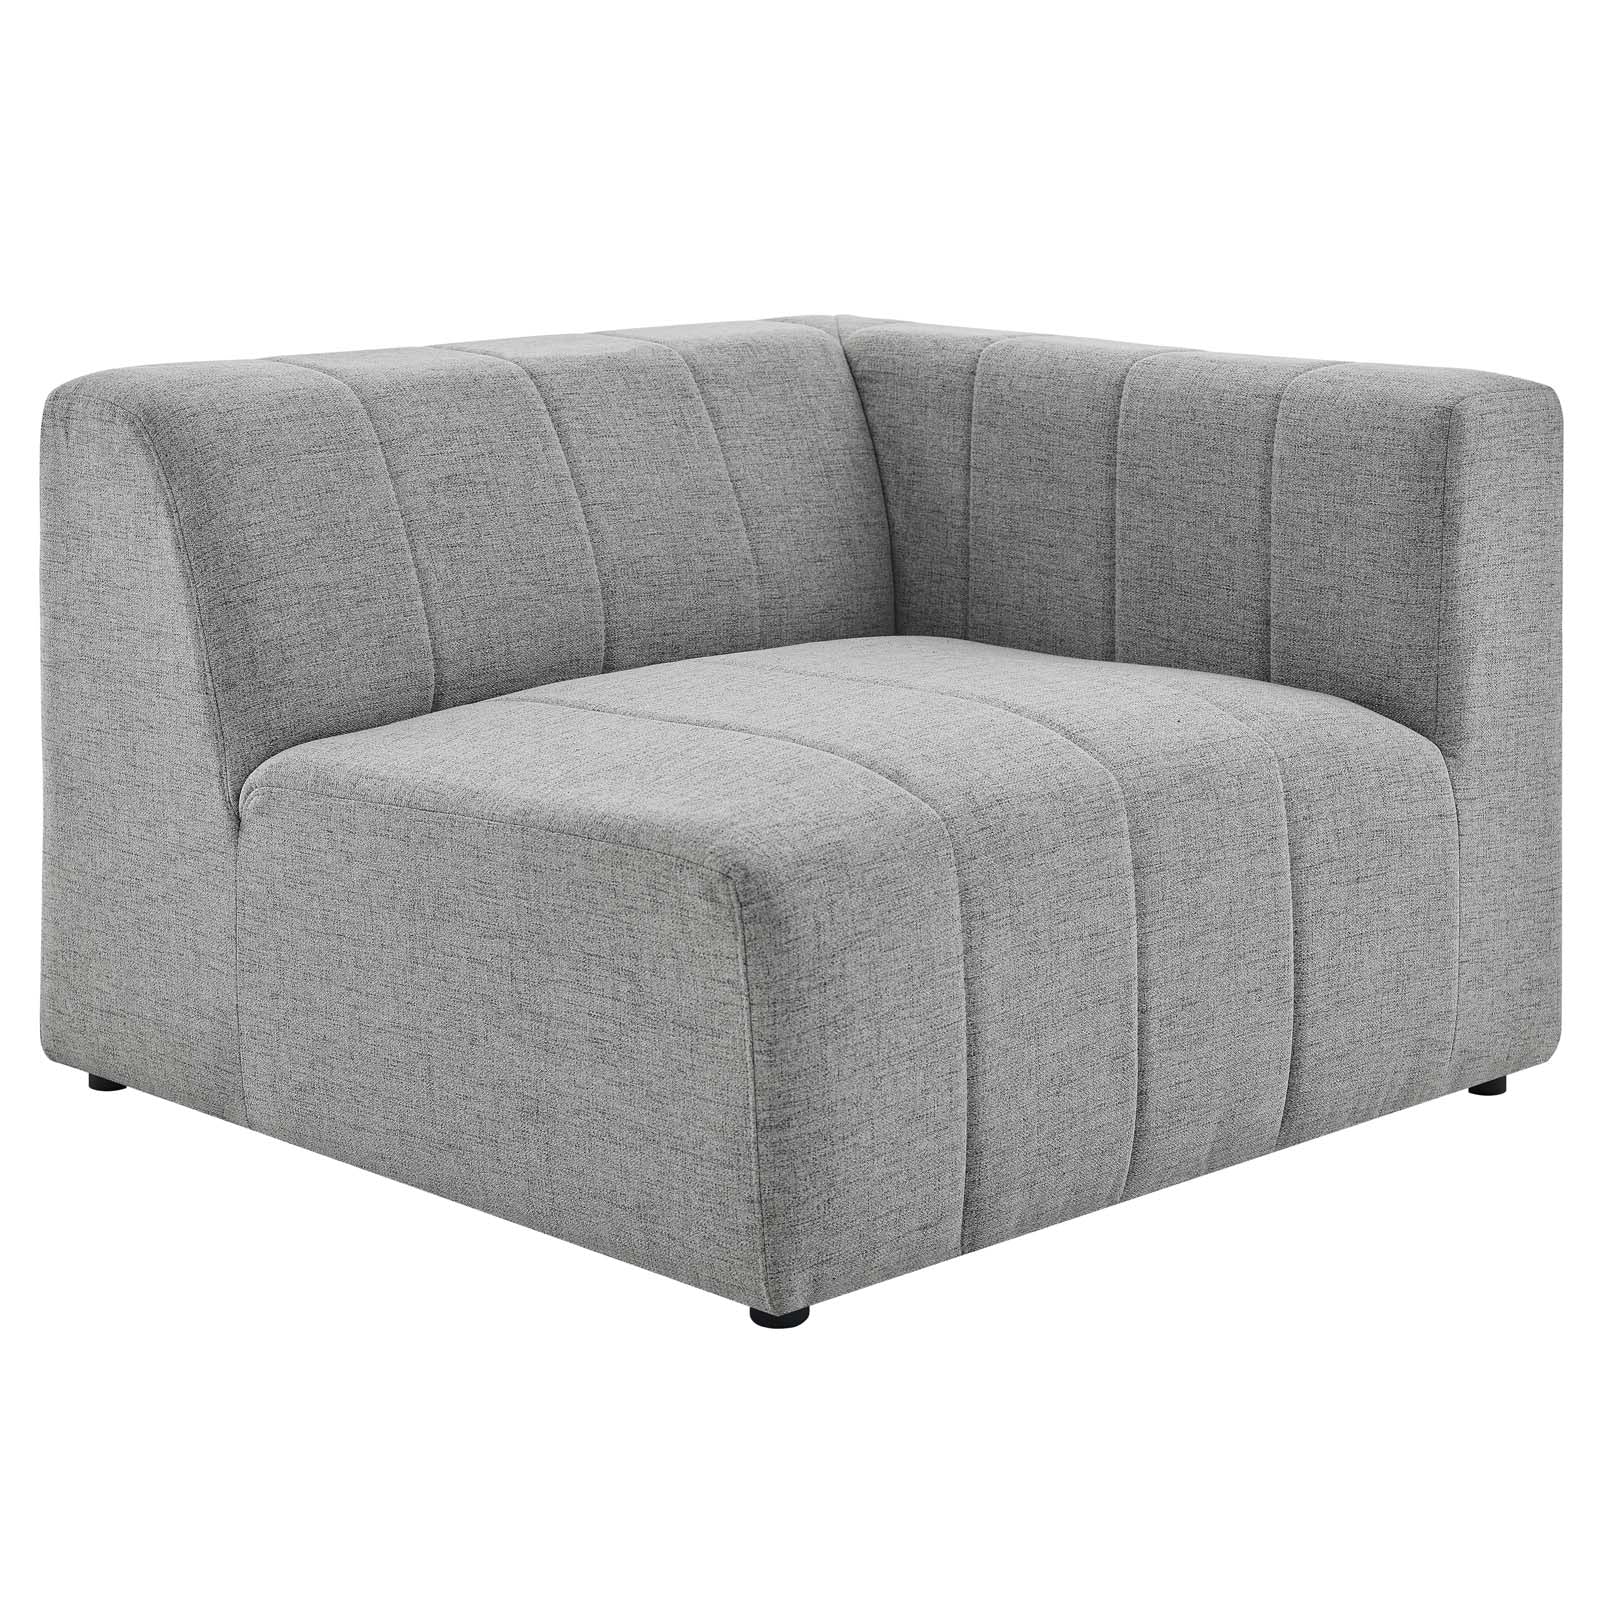 Modway Sectional Sofas - Bartlett Upholstered Fabric 5-Piece Sectional Sofa Light Gray